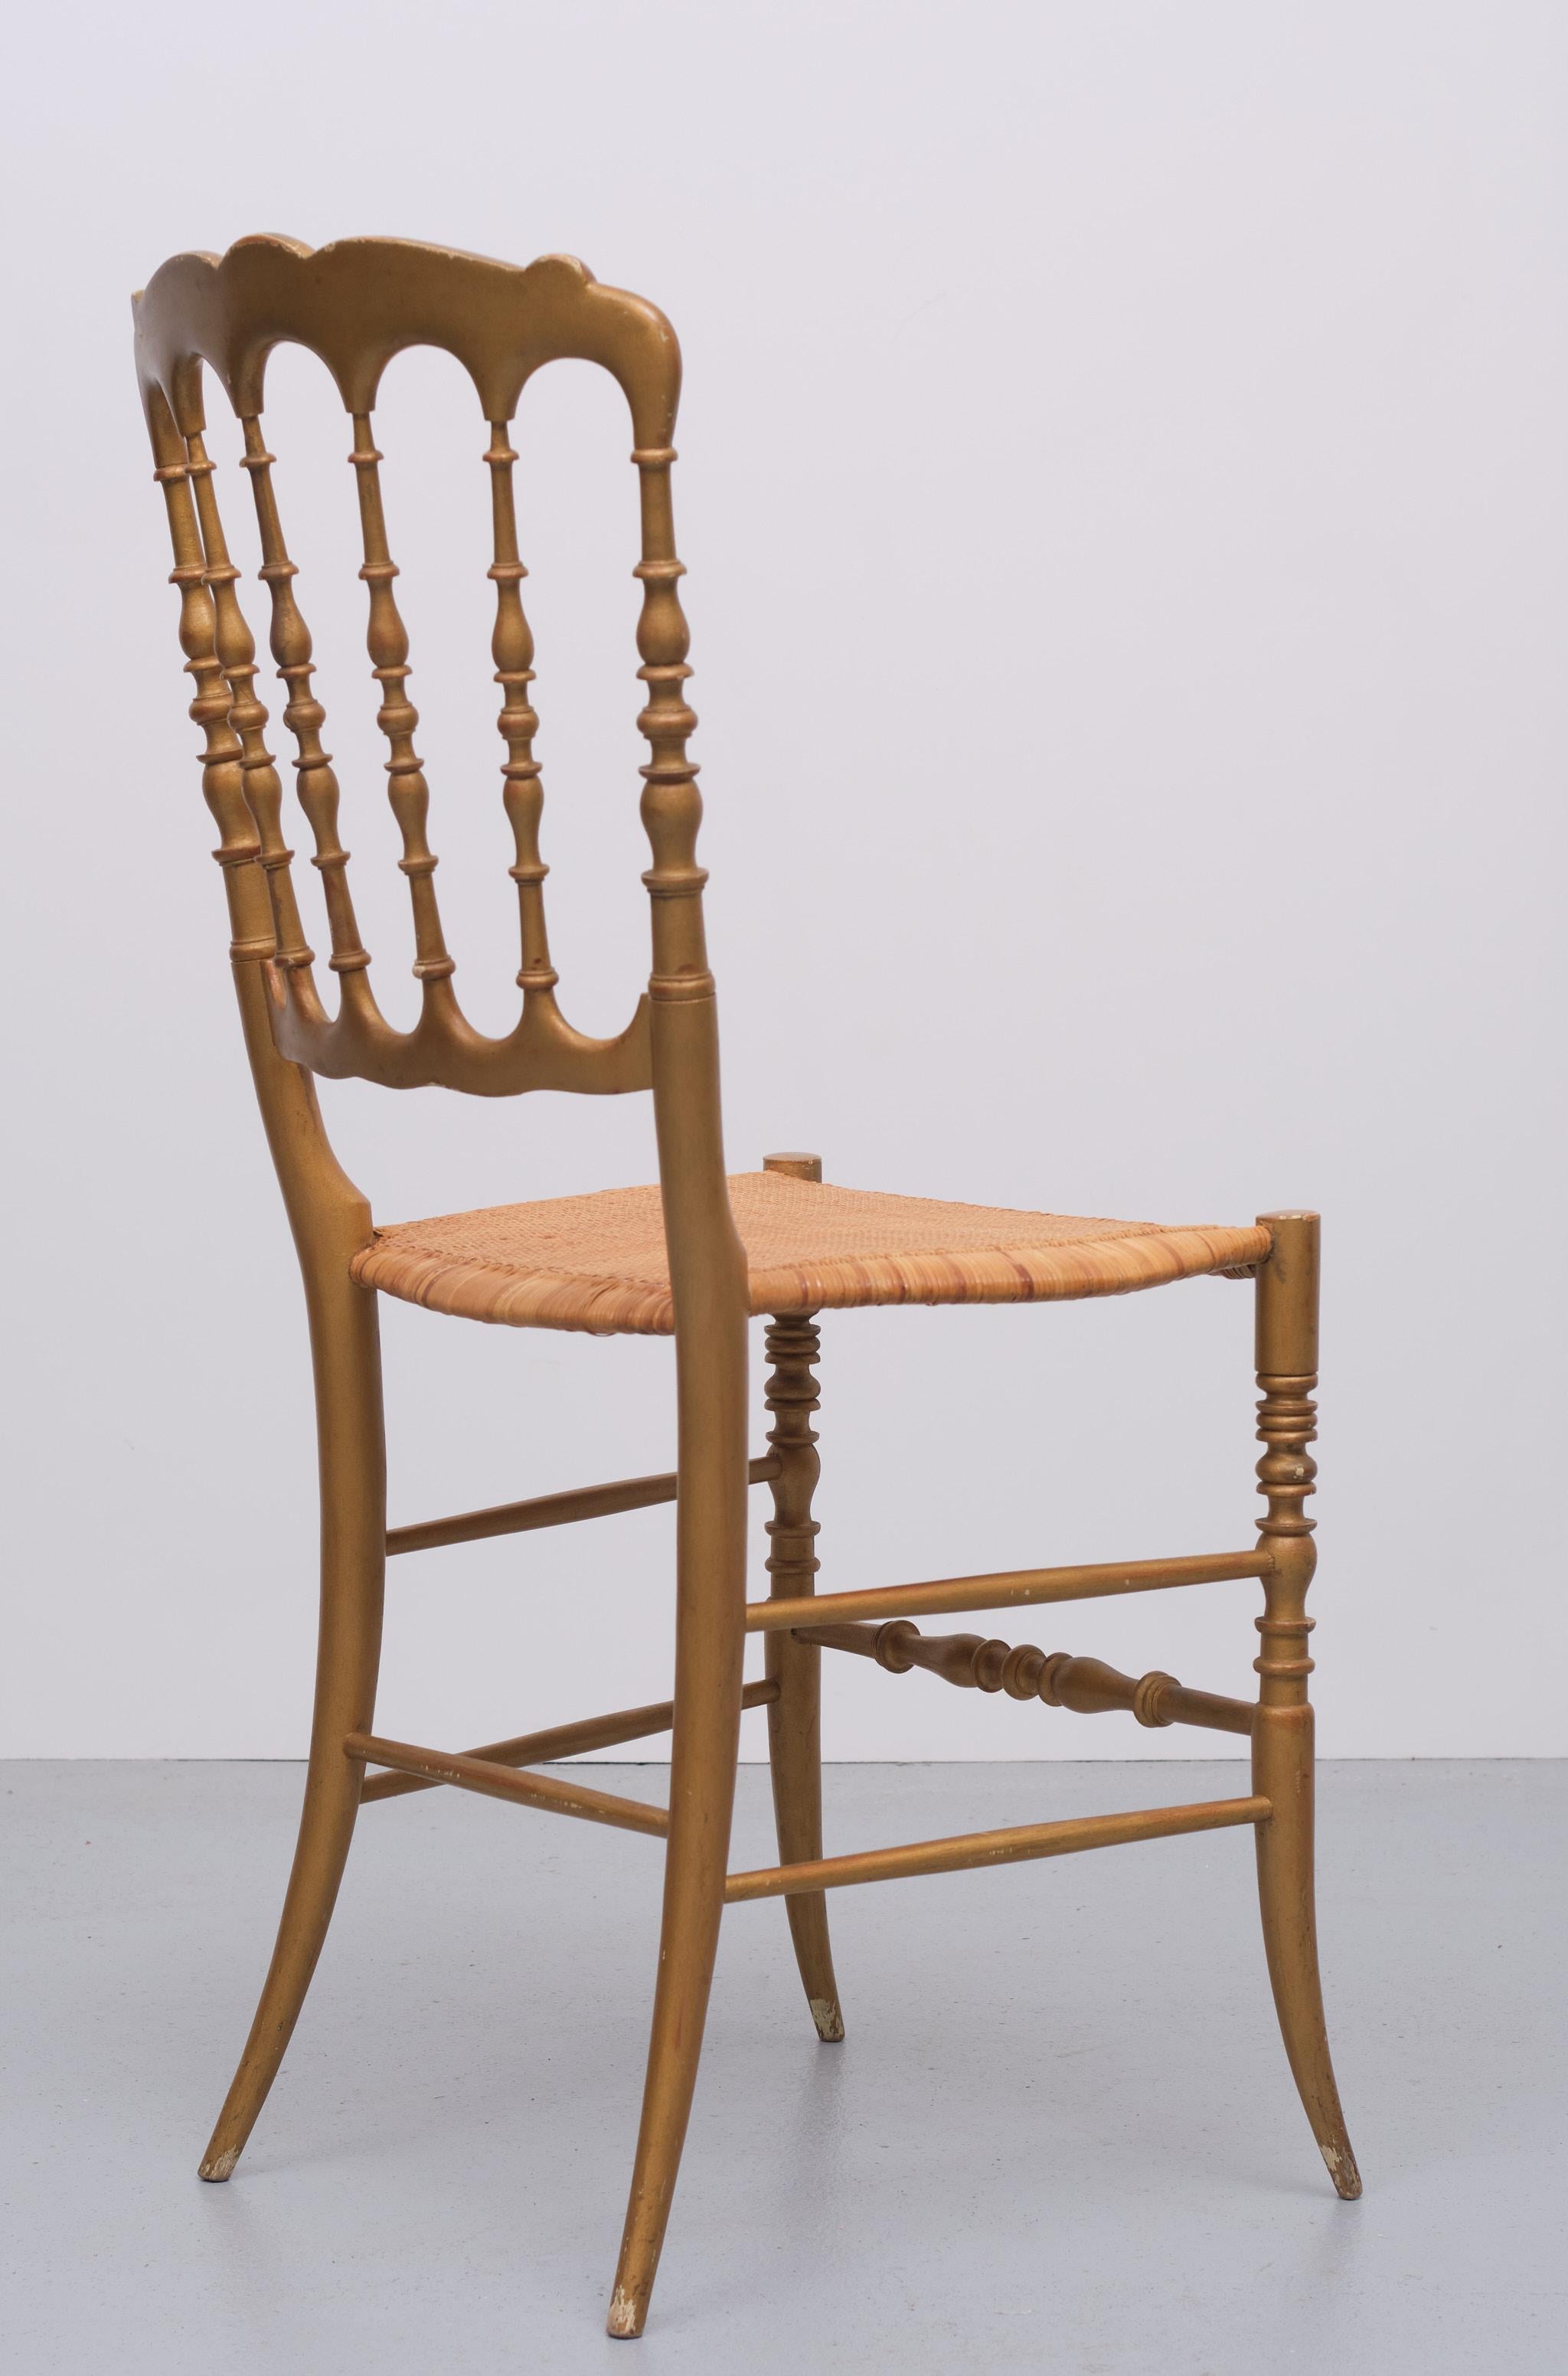 Mid-20th Century Chiavari Chair 1950s Italy For Sale